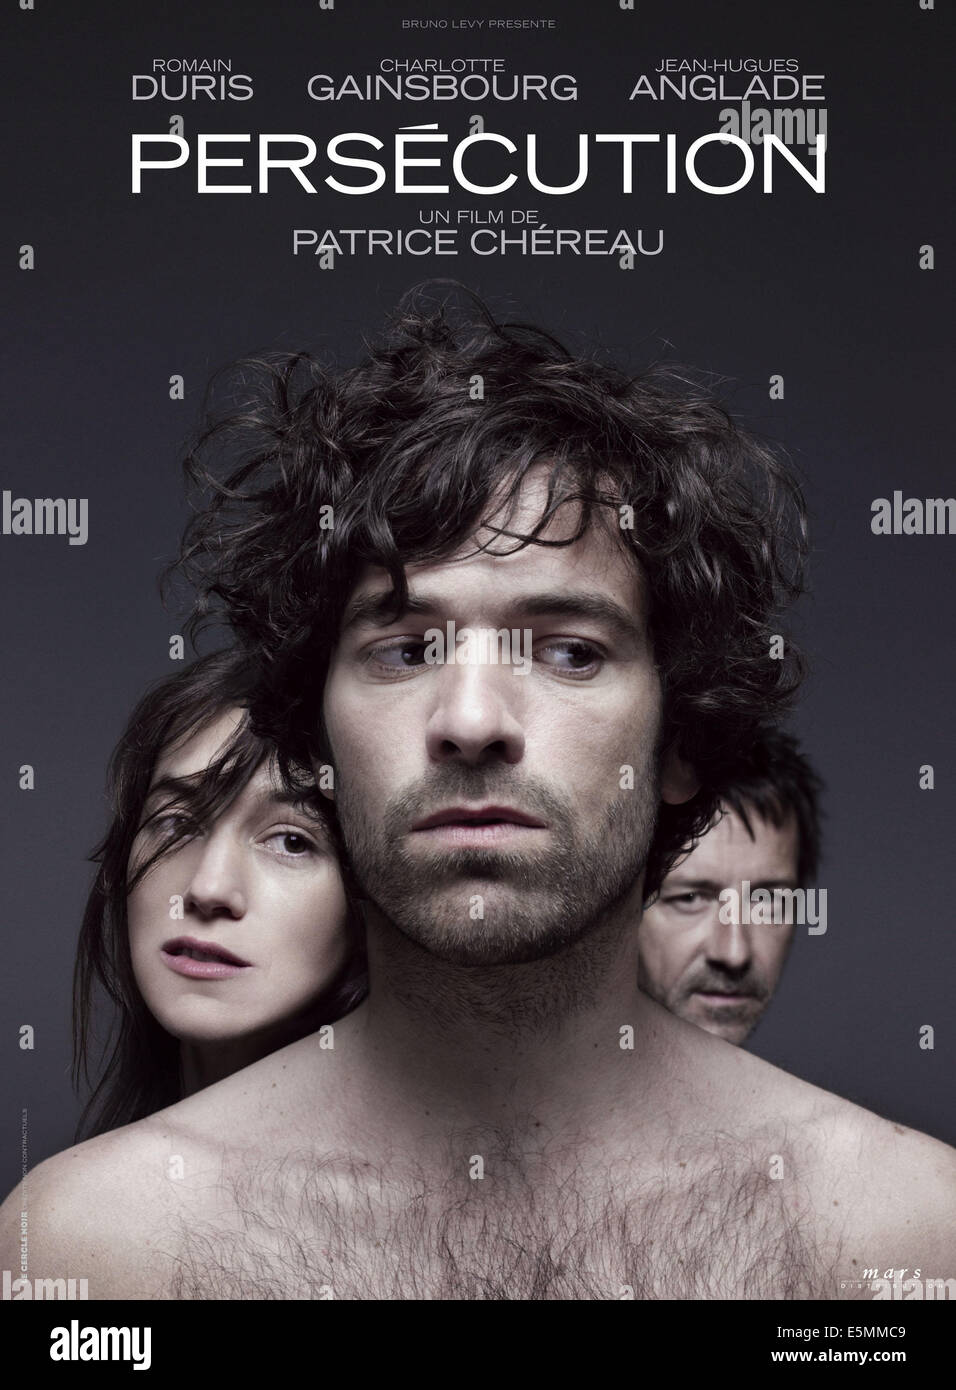 PERSECUTION, French poster art, from left: Charlotte Gainsbourg, Romain Duris, Jean-Hugues Anglade, 2009. ©Mars Stock Photo